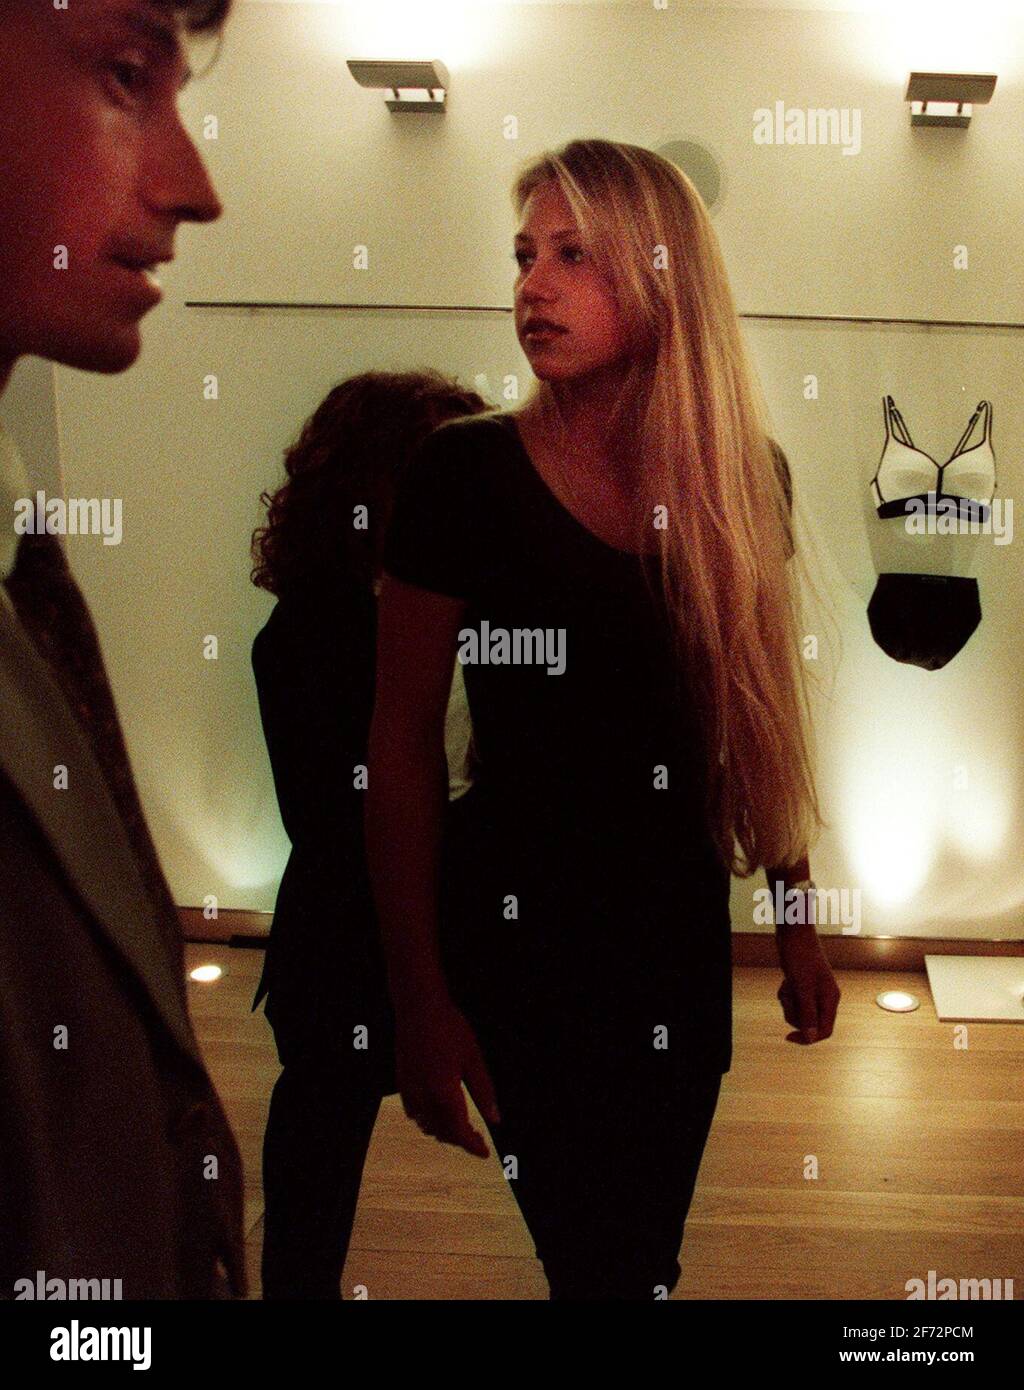 ANNA KOURNIKOVA TENNIS PLAYER FROM RUSSIA JUNE 1999POSES FOR PHOTOGRAPHS AT A PRESS CALL FOR BERLEI BRAS. Stock Photo